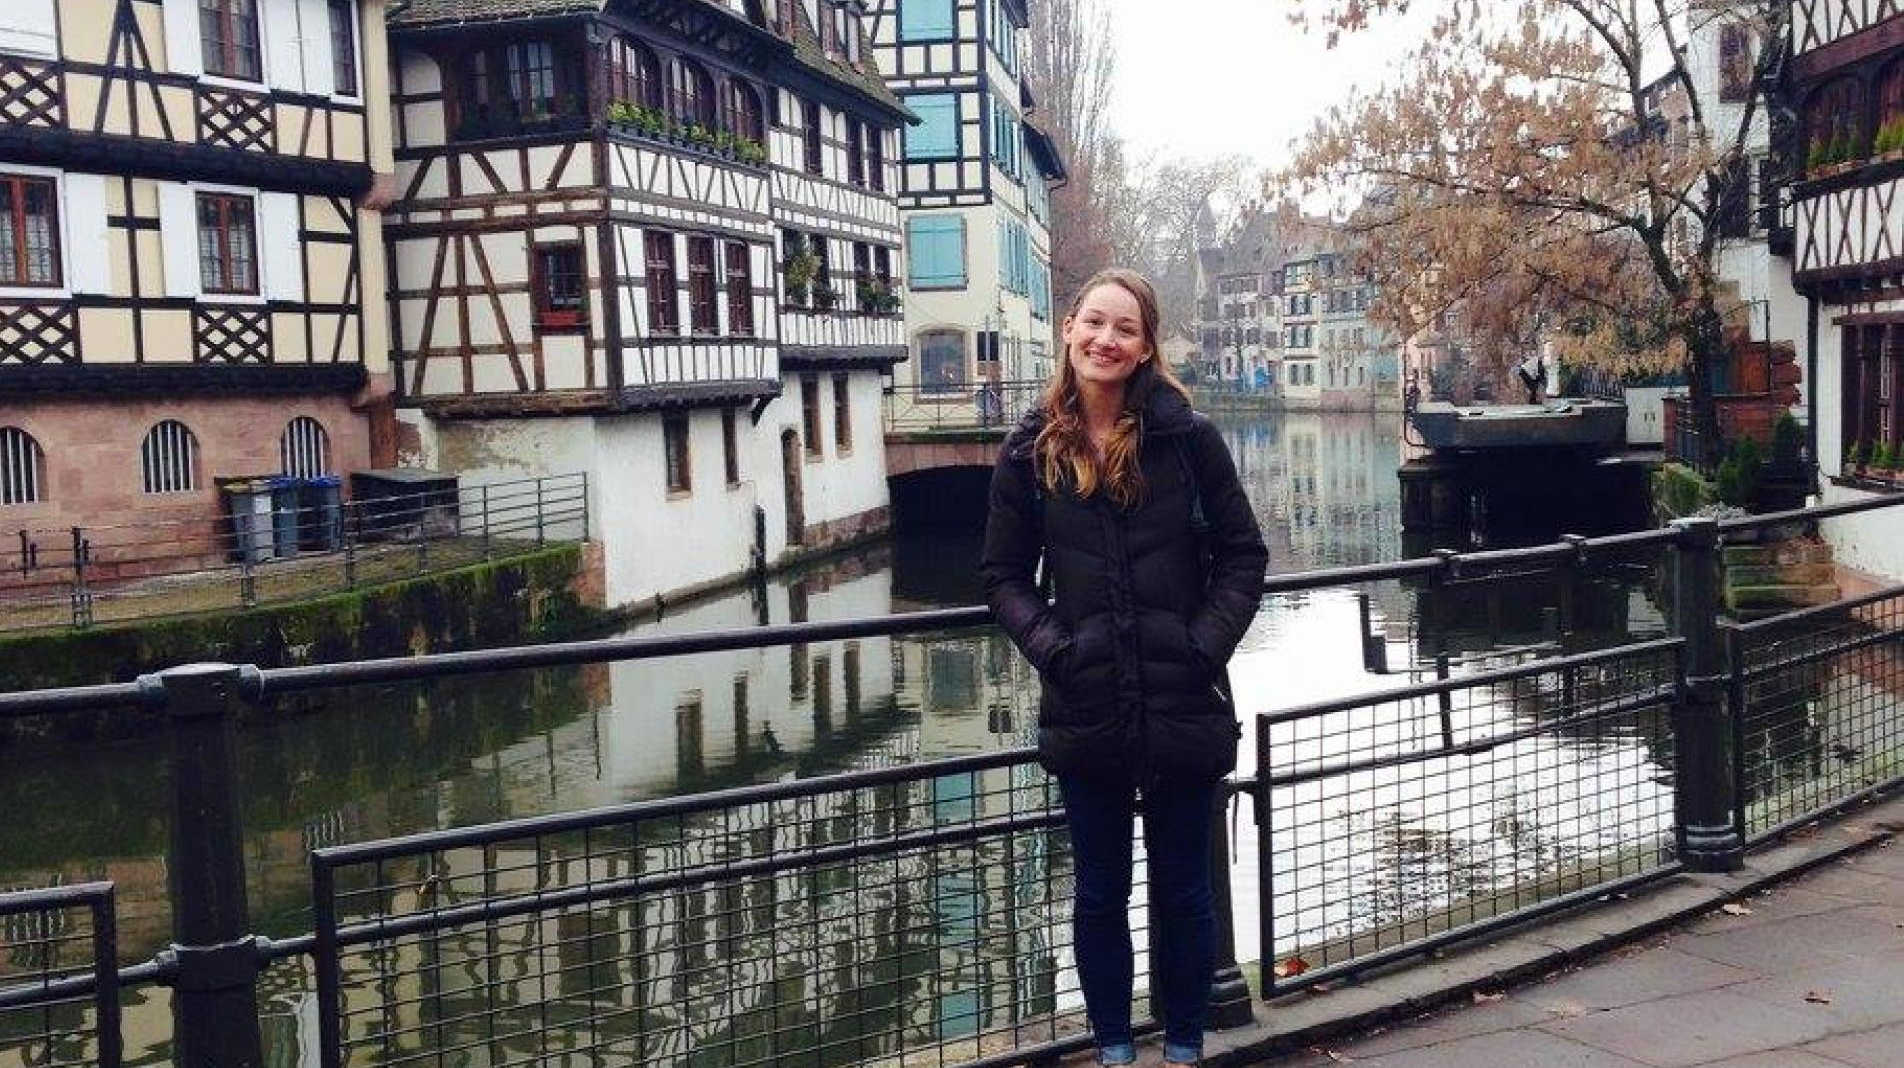 Danika poses for a photo during her study abroad trip in France.